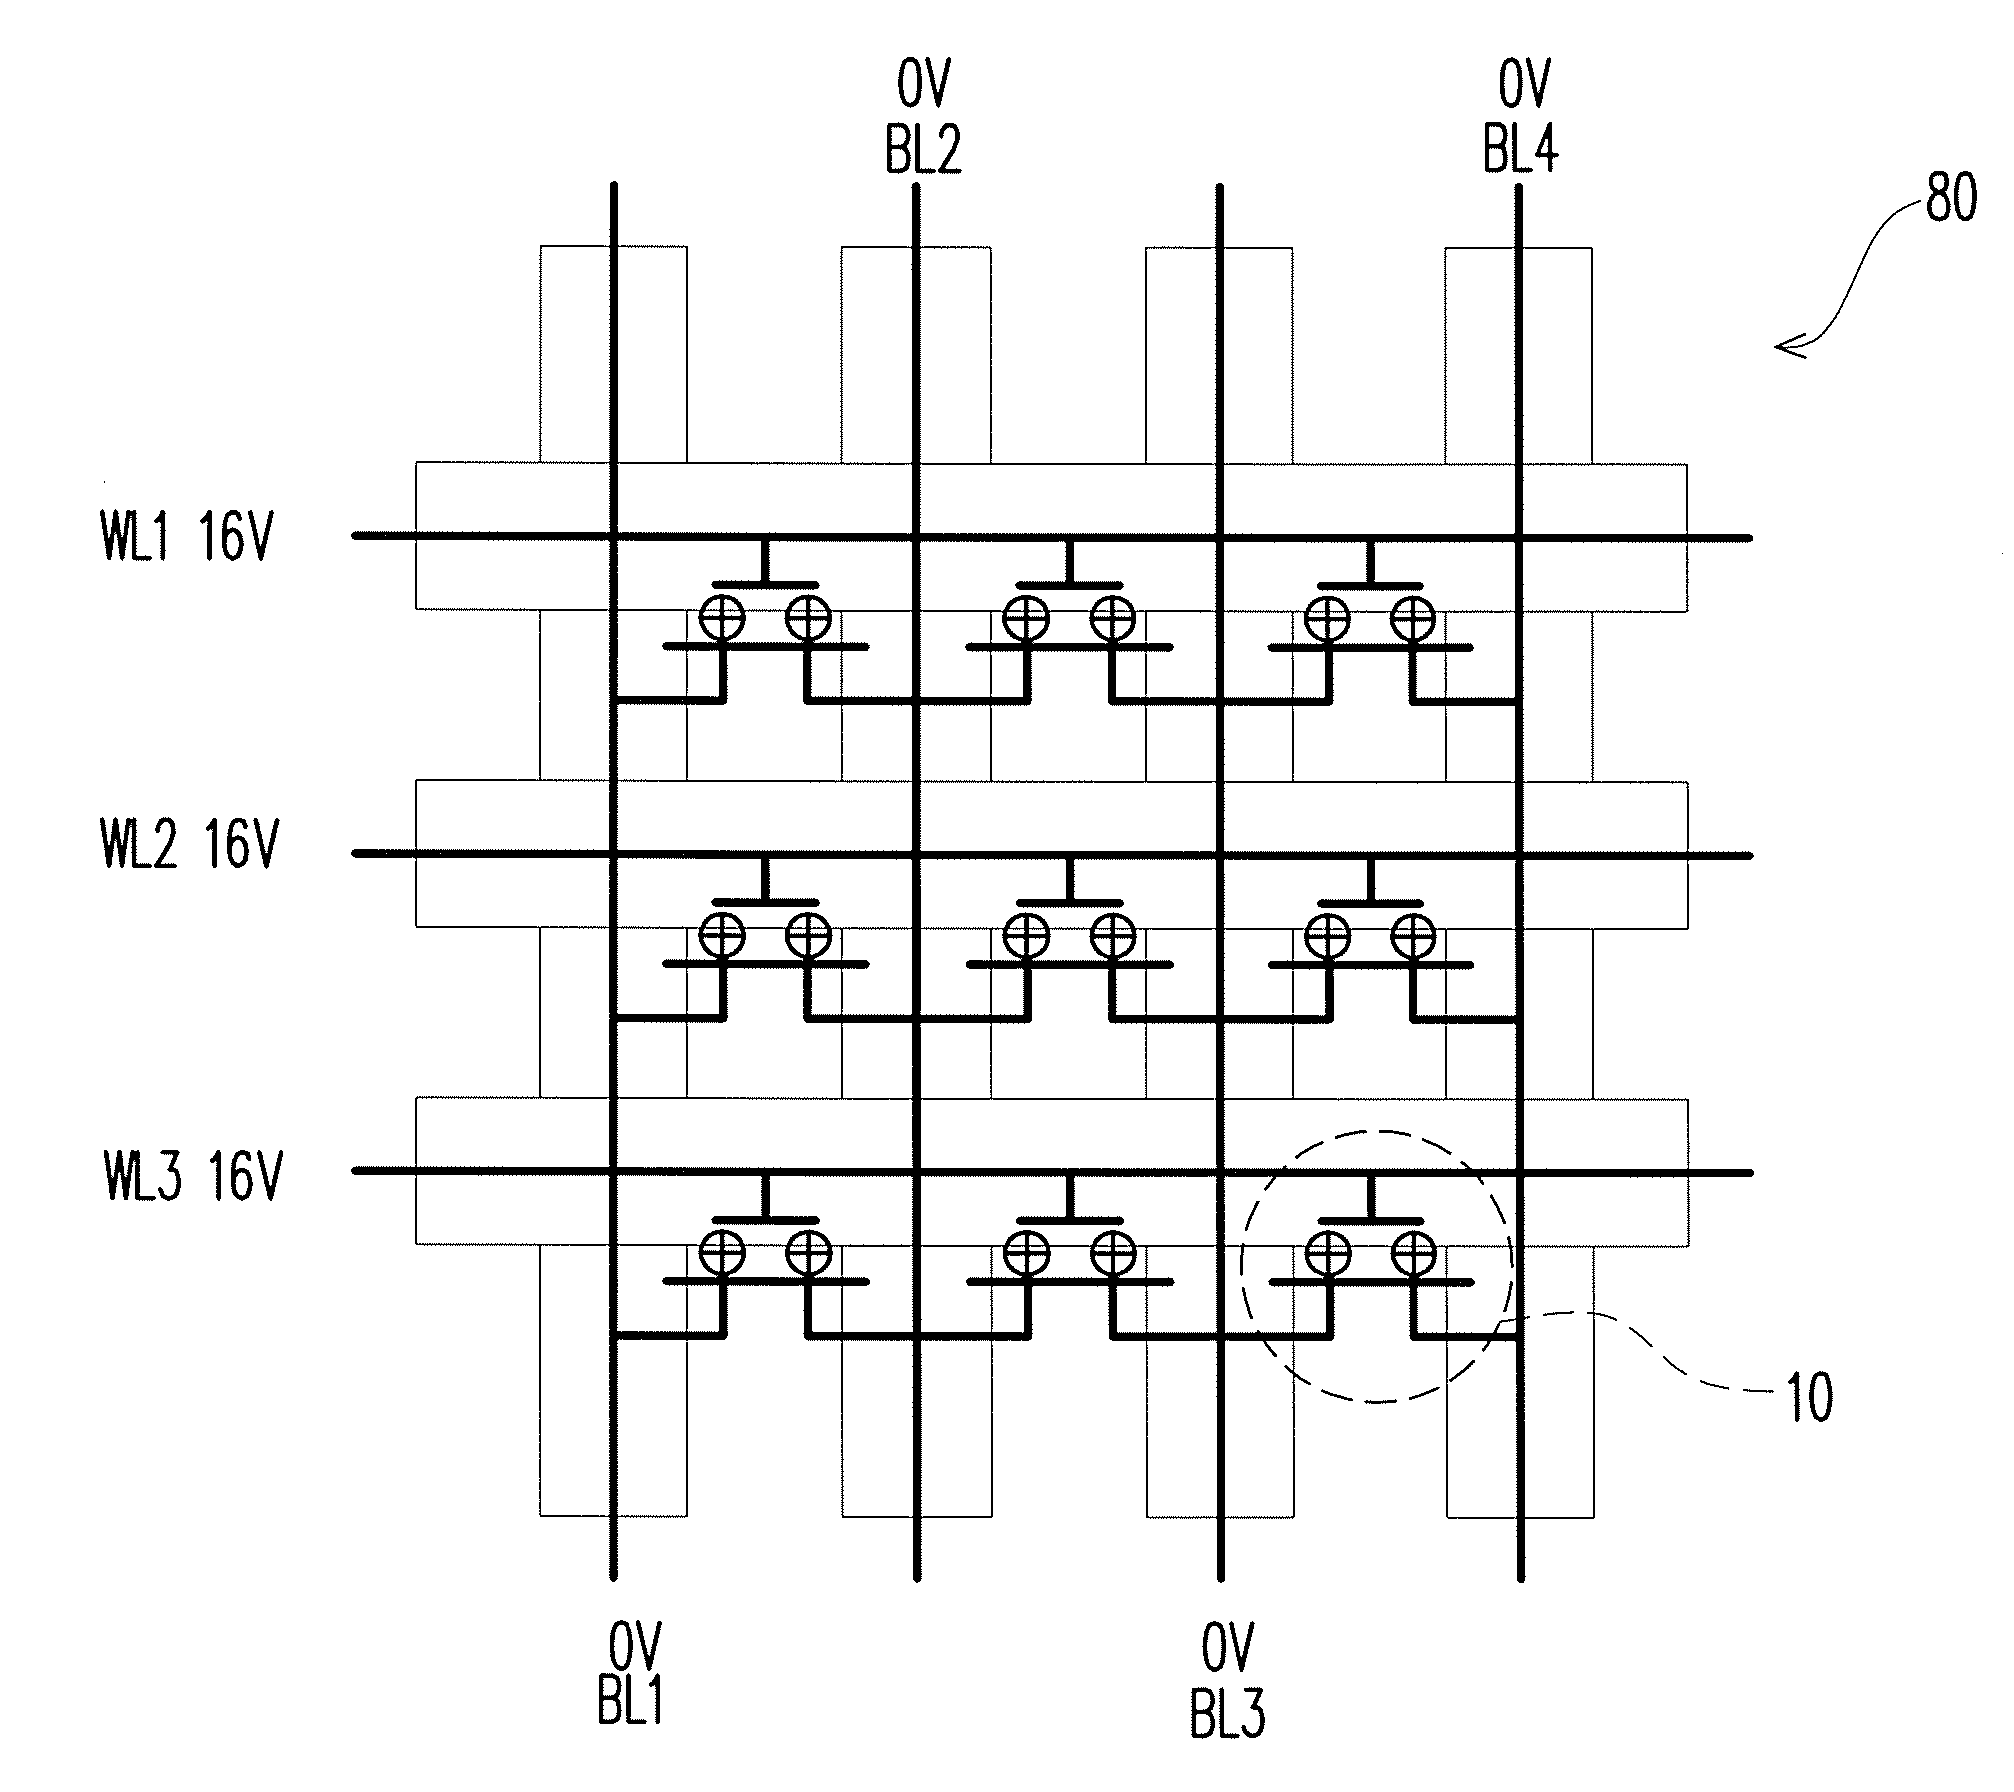 High second bit operation window method for virtual ground array with two-bit memory cells